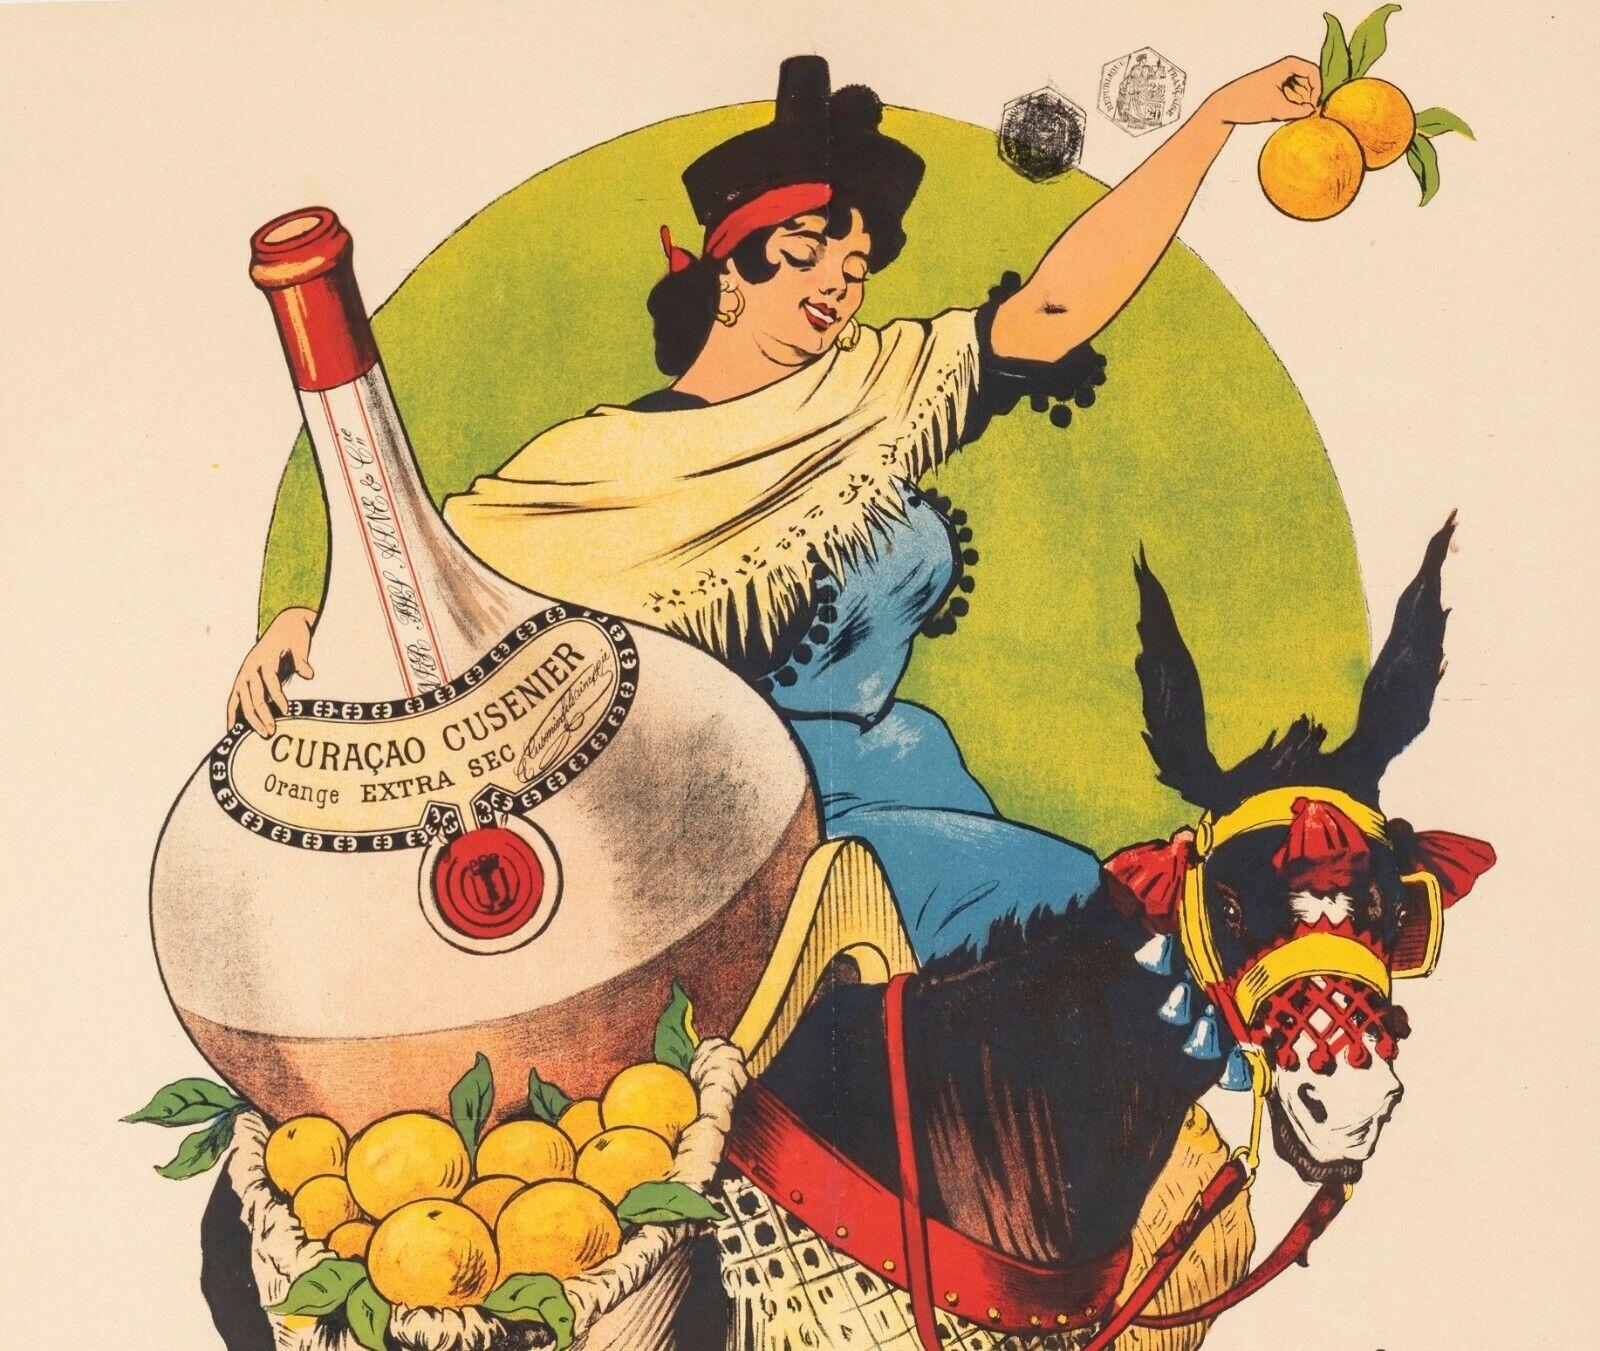 Original Vintage Poster-Gros E. -Curacao Cusenier-Liqueurs-Âne, 1899

Poster for the promotion of Curaçao Cusenier by the artist E. Gros.
Color lithograph poster advertising Cusenier extra dry Curaçao. The poster depicts a woman, holding two oranges